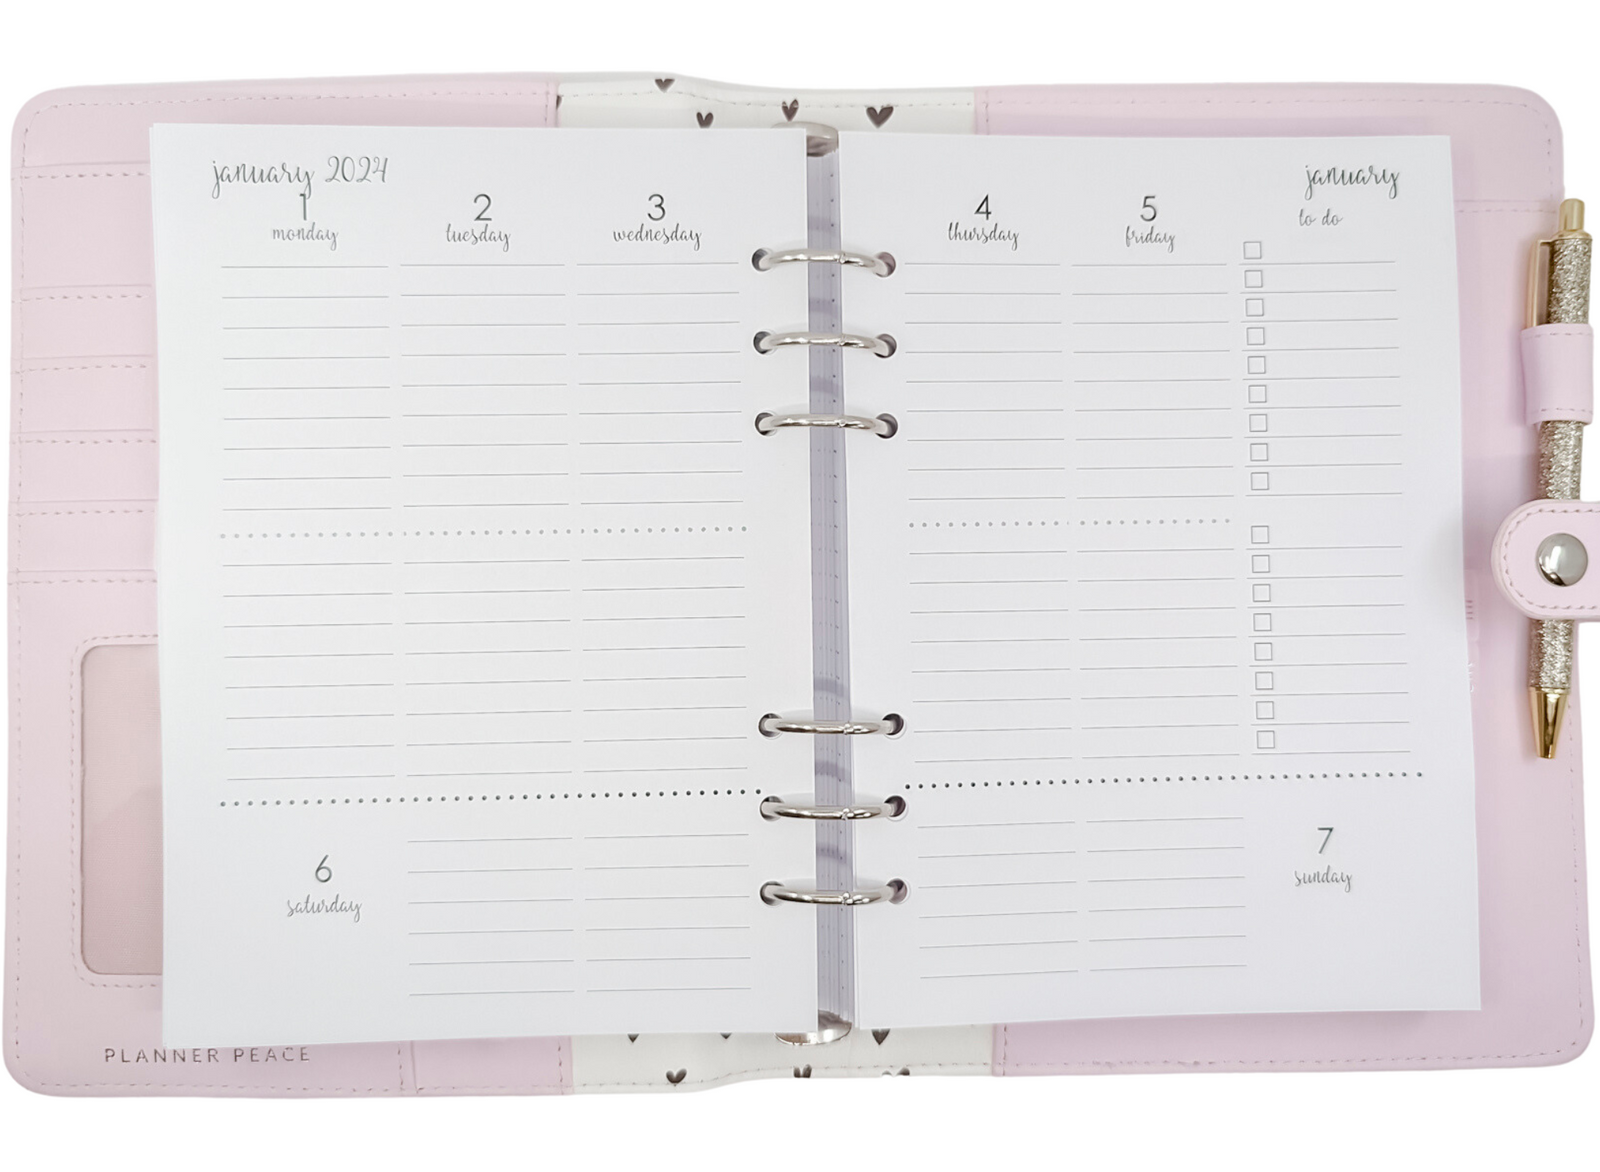 A5 Planner Refill for Kikki.K and Filofax planners